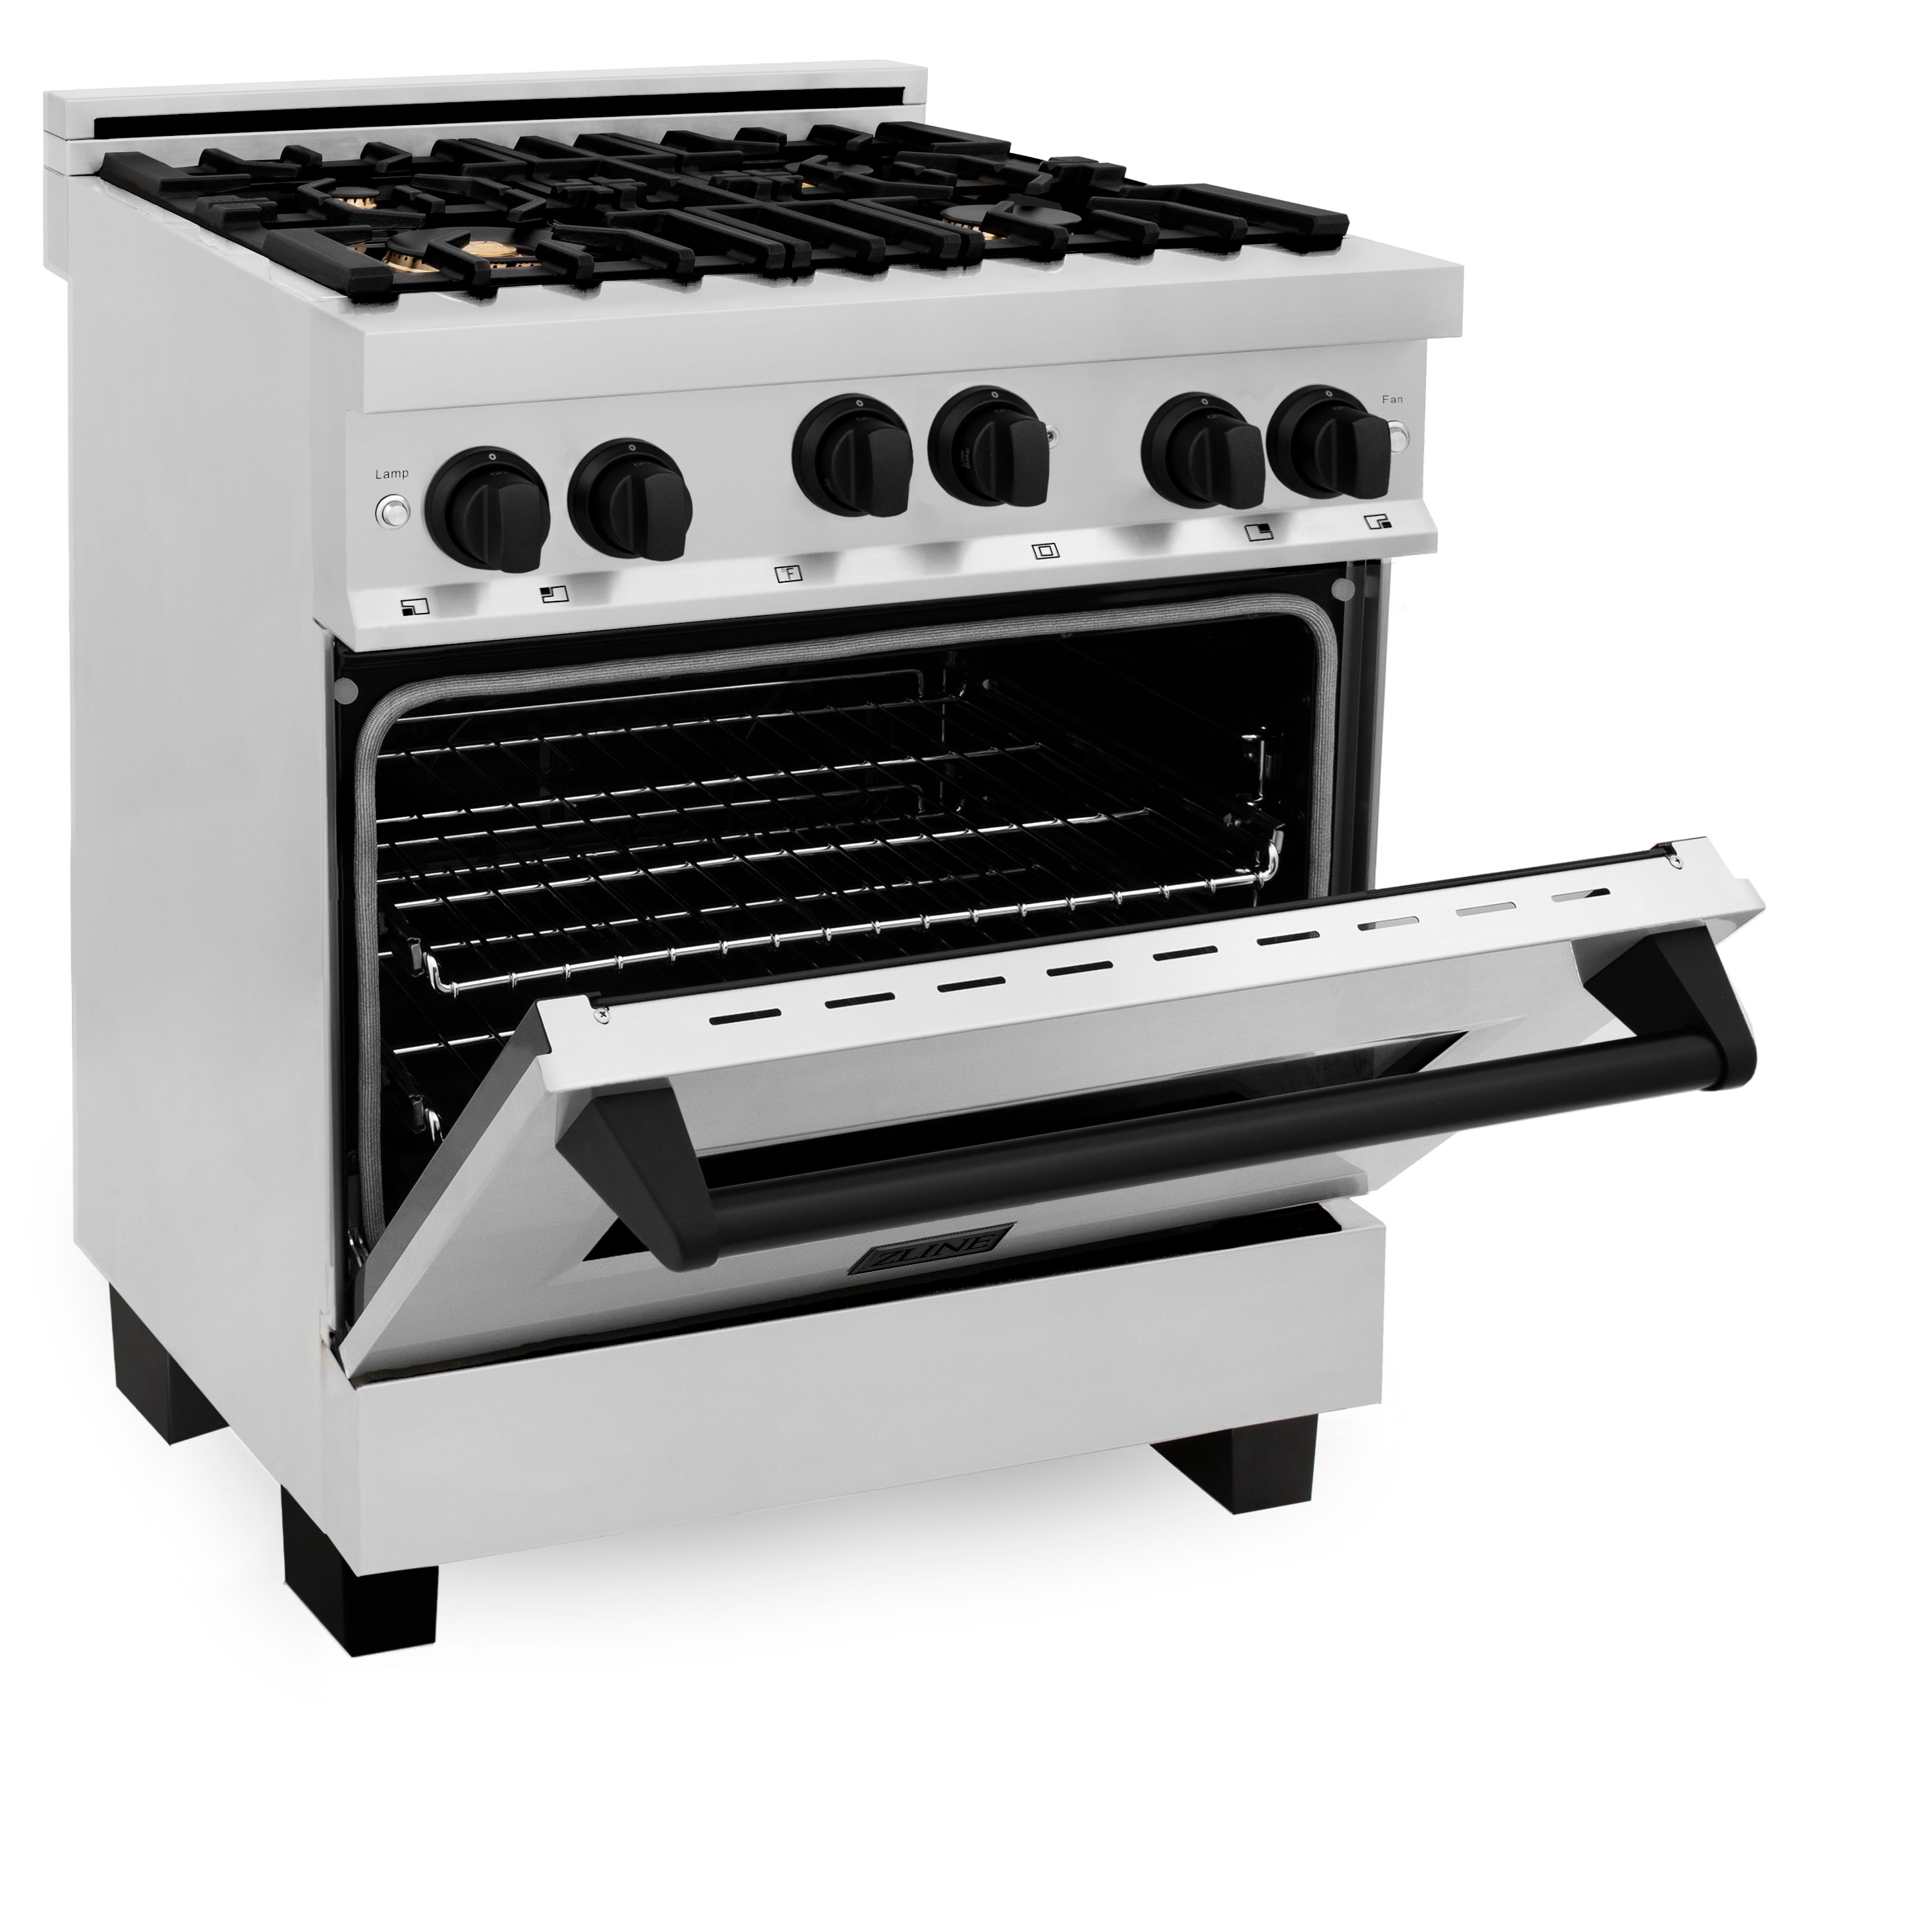 ZLINE Autograph Edition 30 in. 4.0 cu. ft. Range with Gas Stove and Gas Oven in Stainless Steel with Accents (RGZ-30)